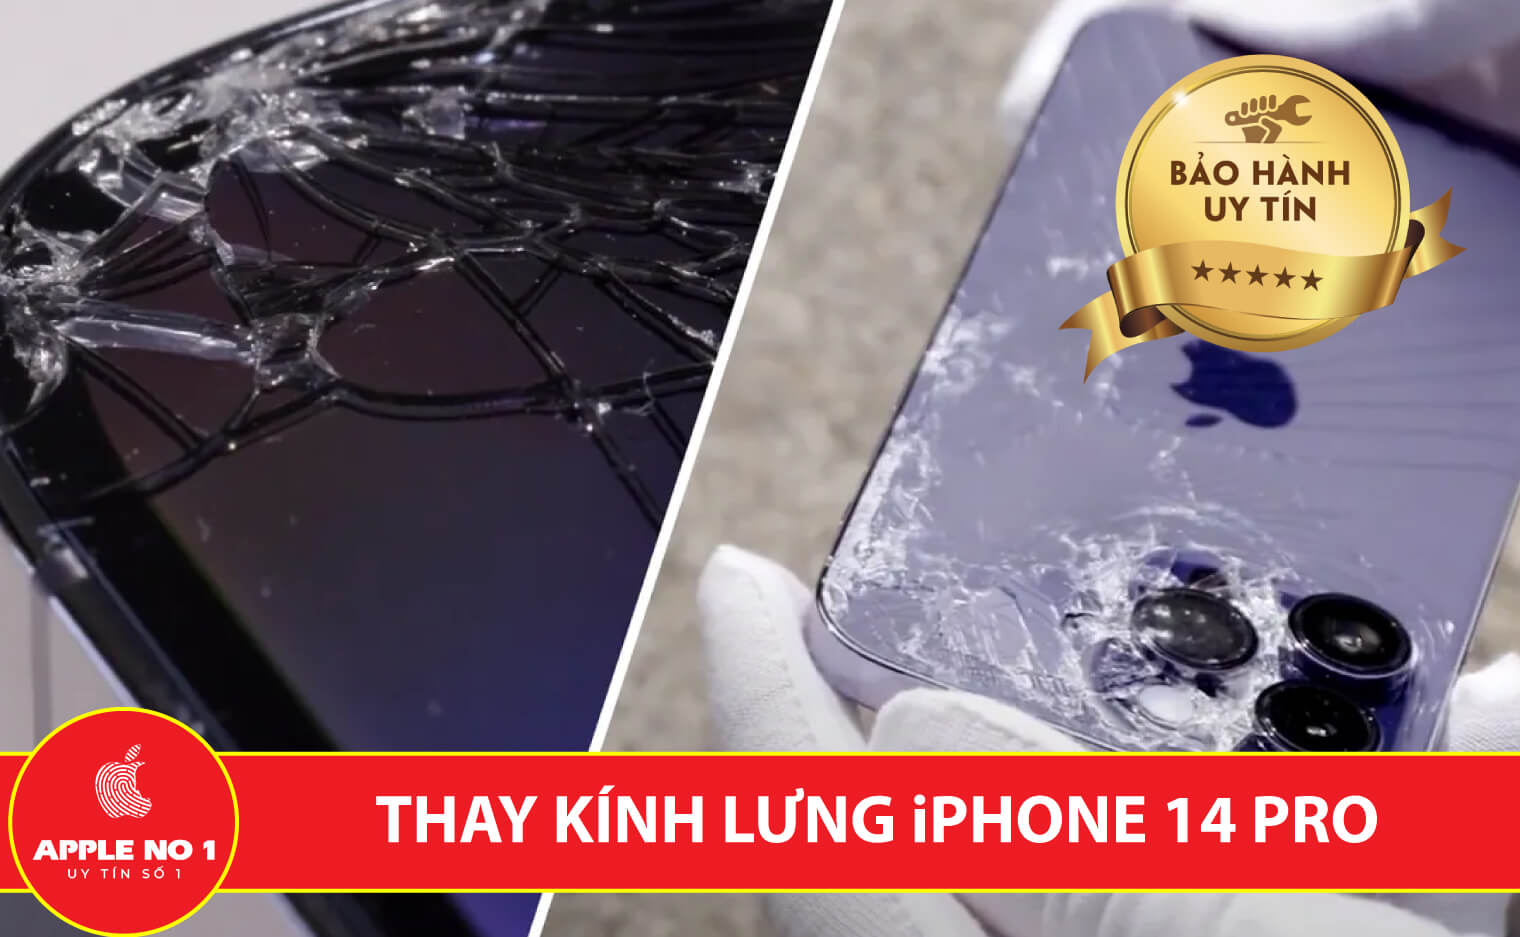 thay kinh lung iphone 14 pro